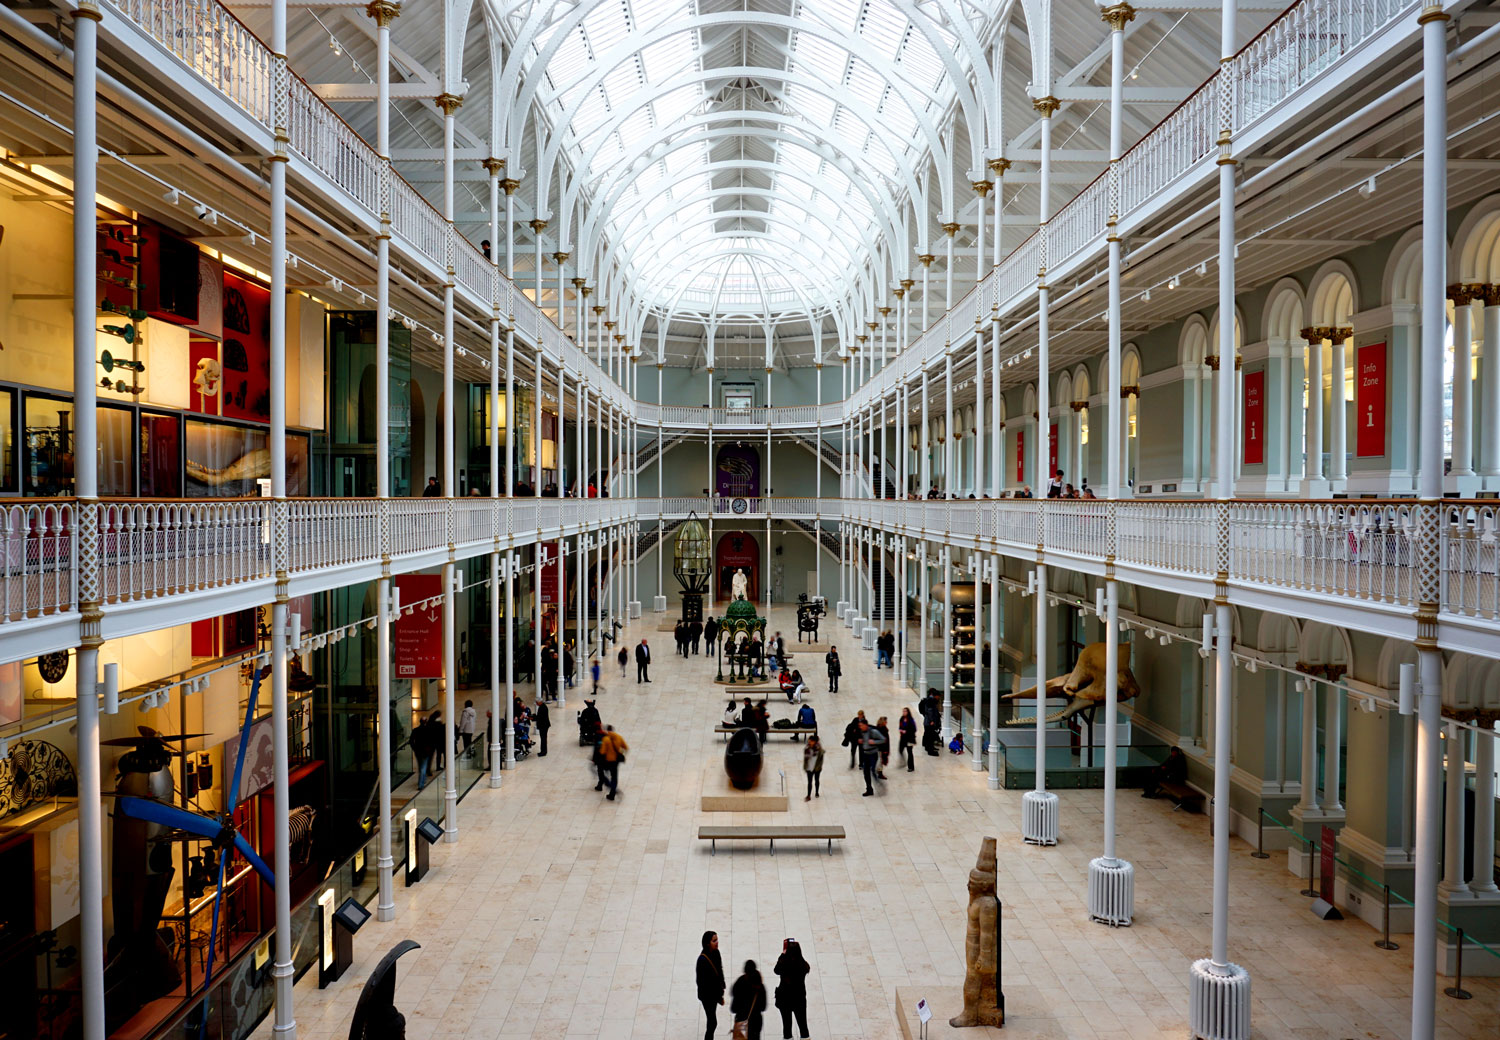 Interior foyer of the National Museum of Scotland